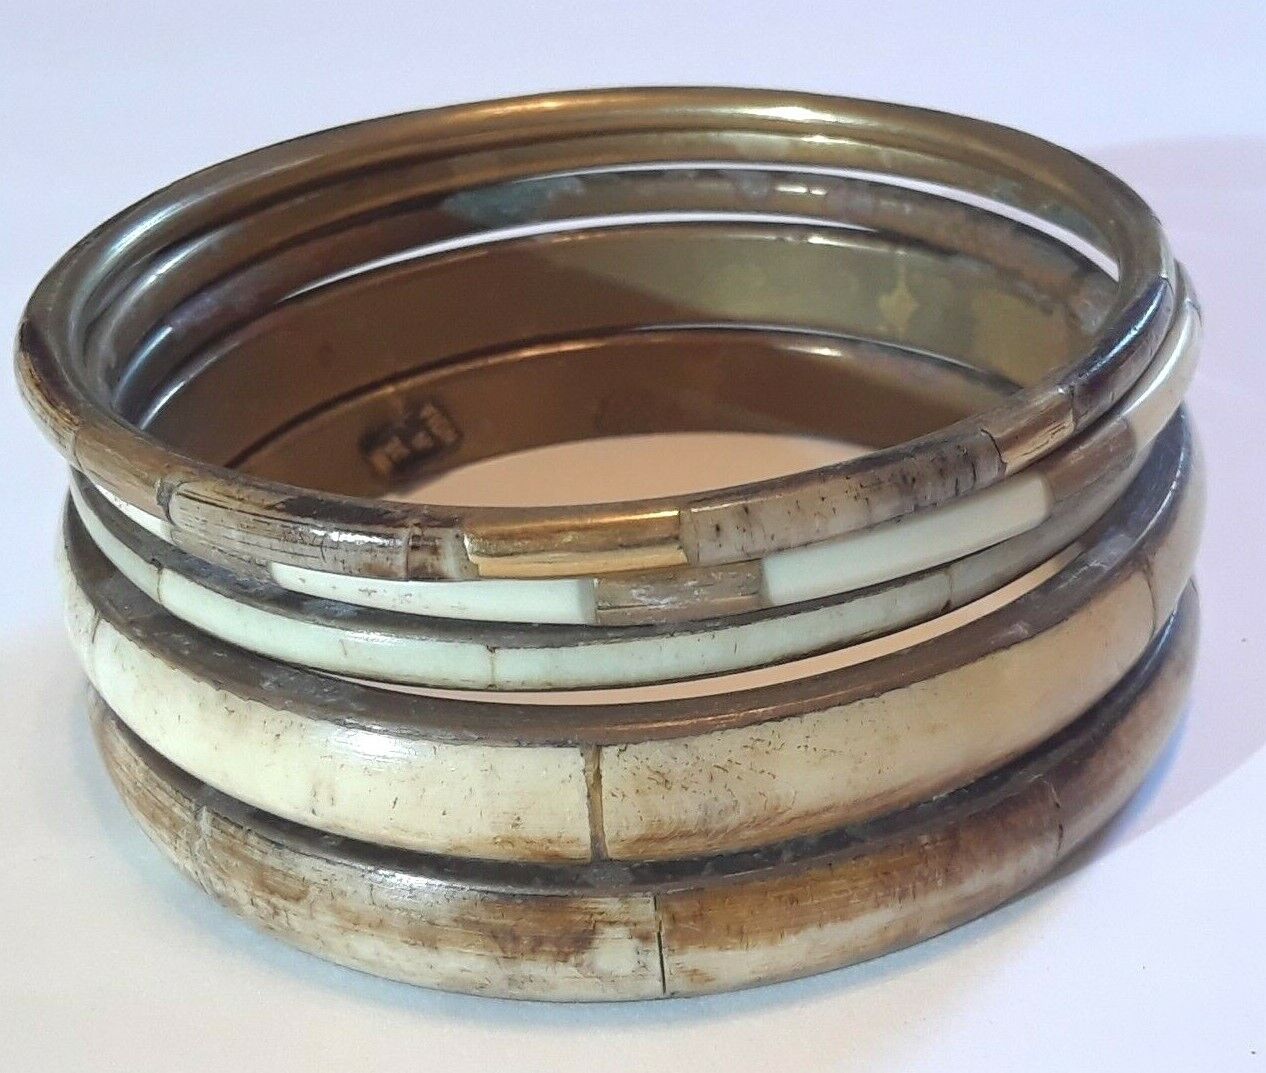 Lot of 5 gold tone bangle bracelets with inlay stone. Made in India. Beautiful! Unbranded - фотография #2